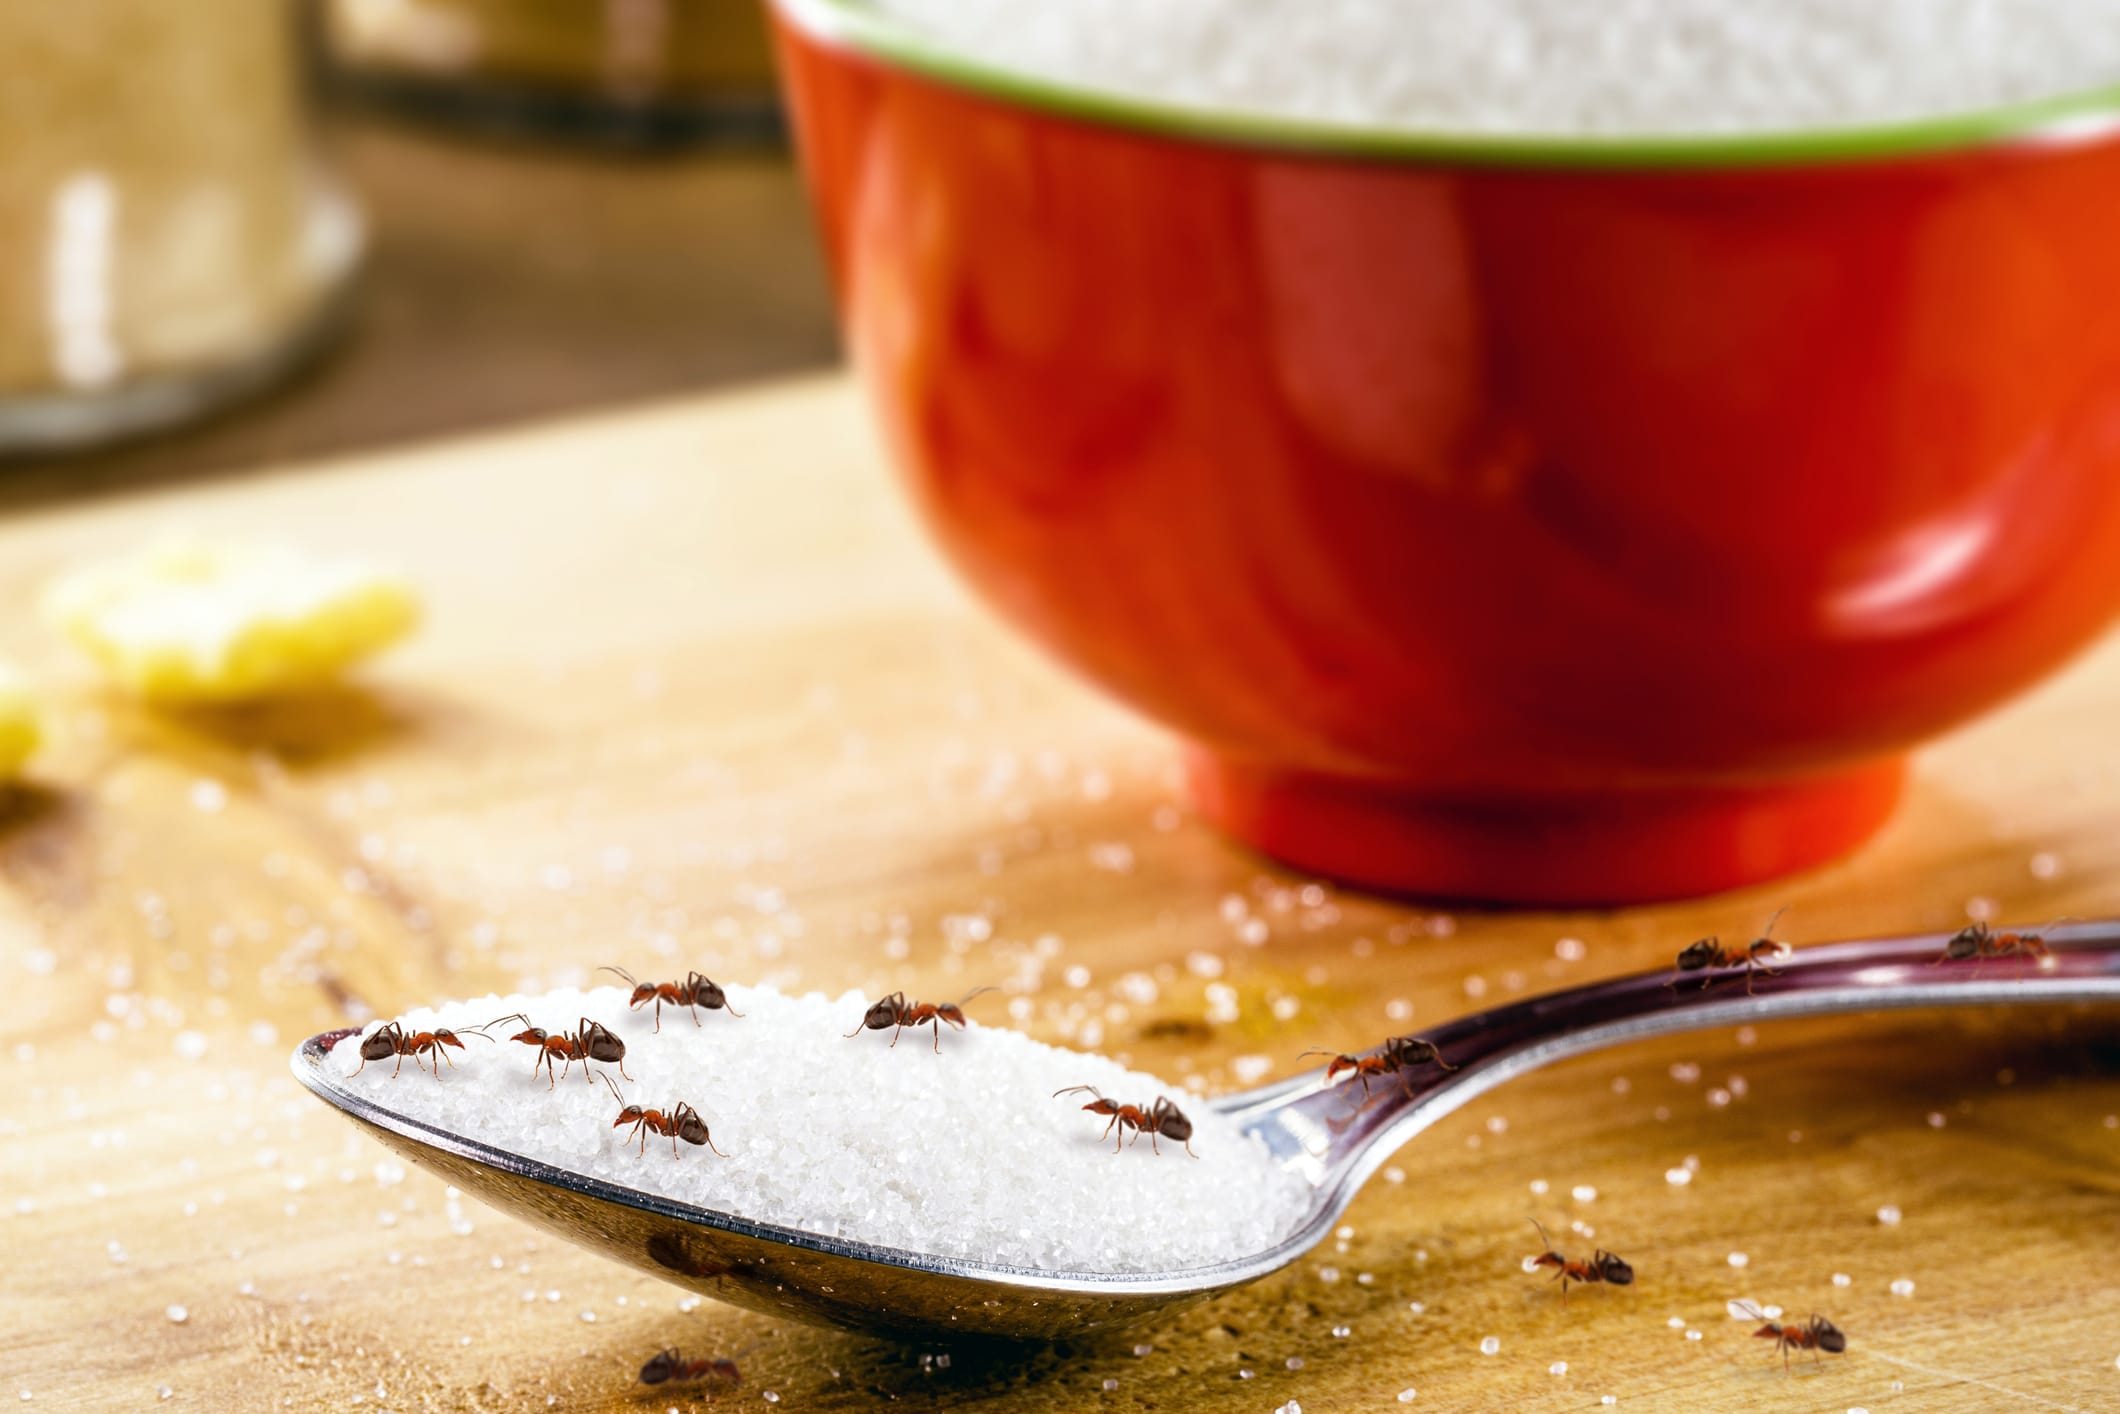 An ant infestation takes over a kitchen as ants flock to a spoonful of sugar sitting in front of a bowl.